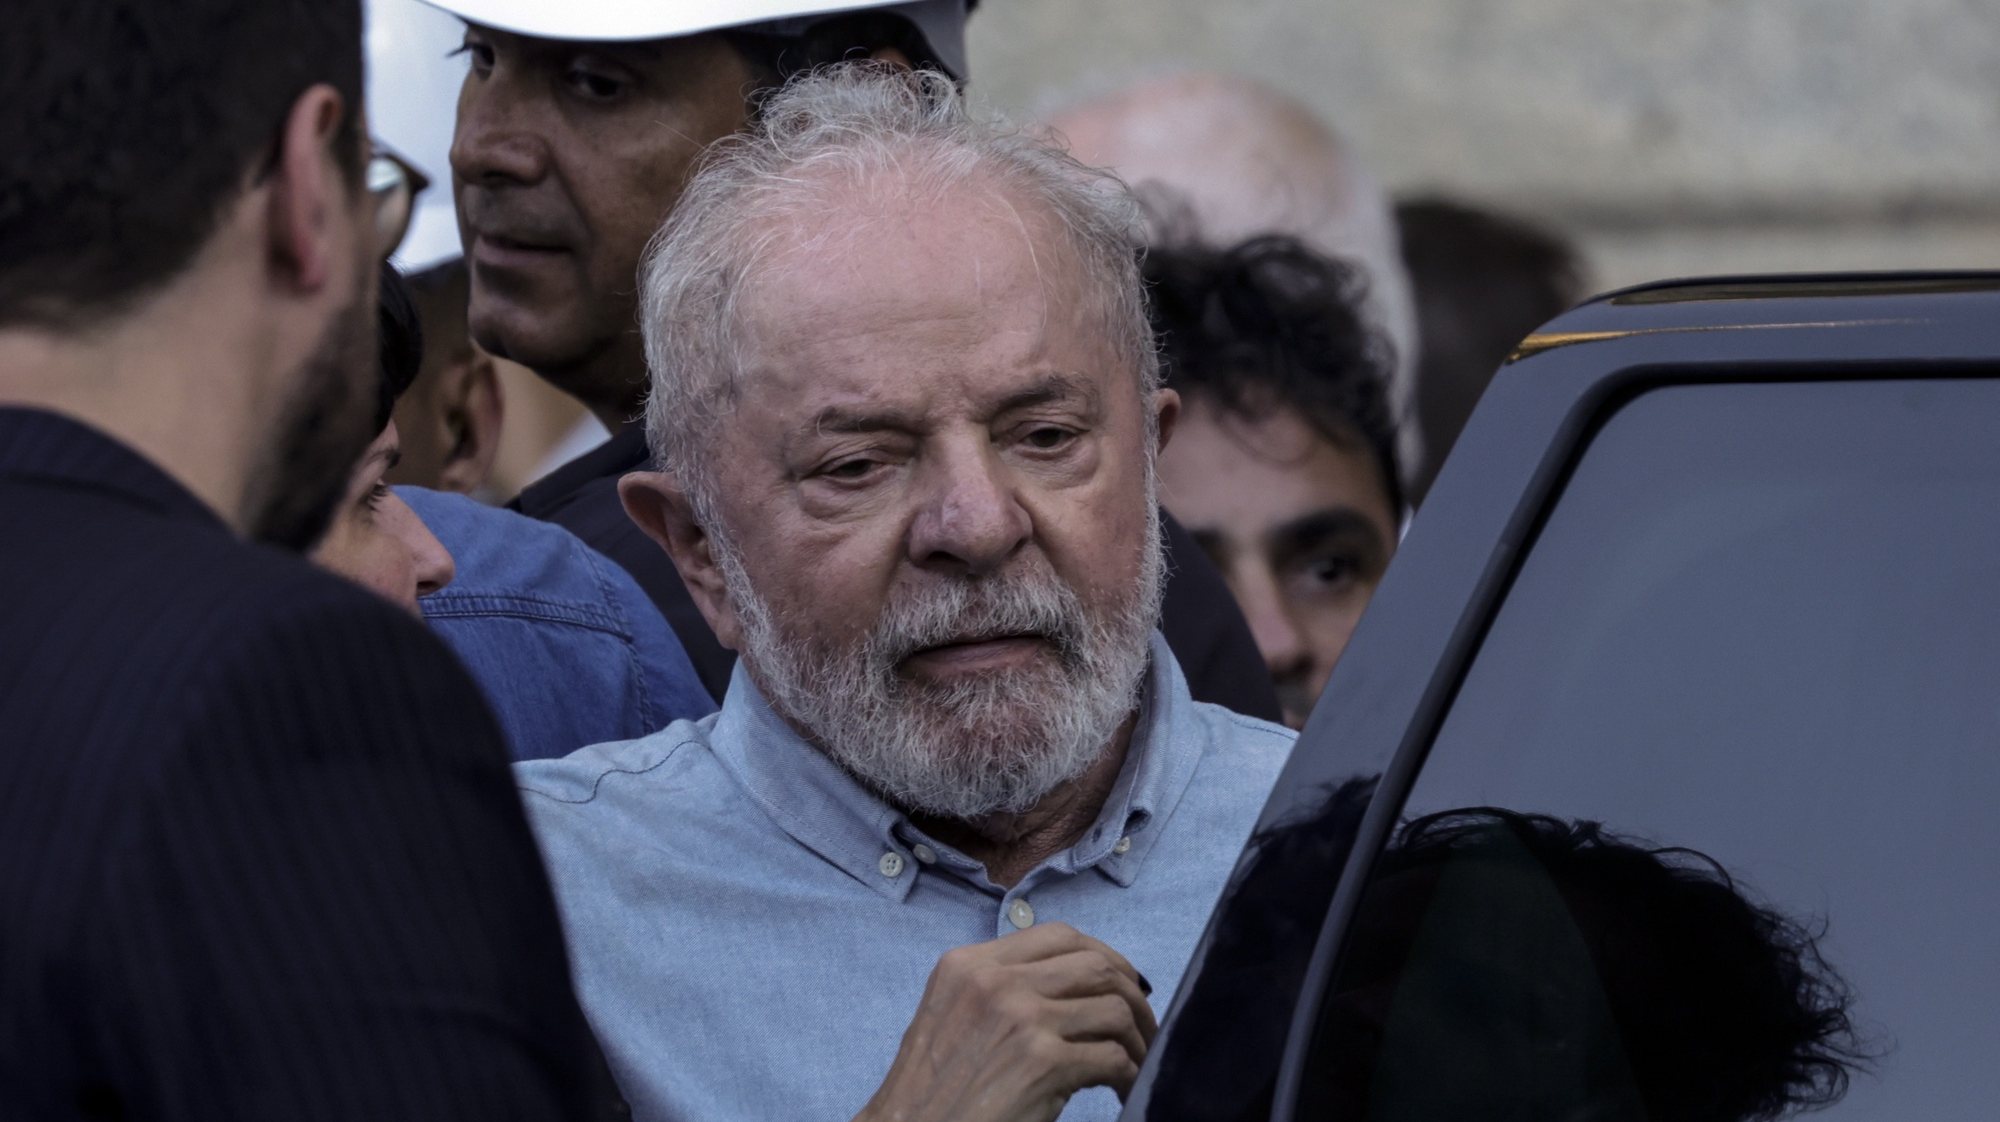 epa10540663 Brazilian President Luiz Inacio Lula da Silva is seen during a tour of the reconstruction works of the National Museum, in Rio de Janeiro, Brazil, 23 March 2023 (issued 24 March 2023). Lula postponed on 24 March his trip to China for one day, given a medical recommendation for &quot;mild&quot; pneumonia, official sources reported.  EPA/Antonio Lacerda